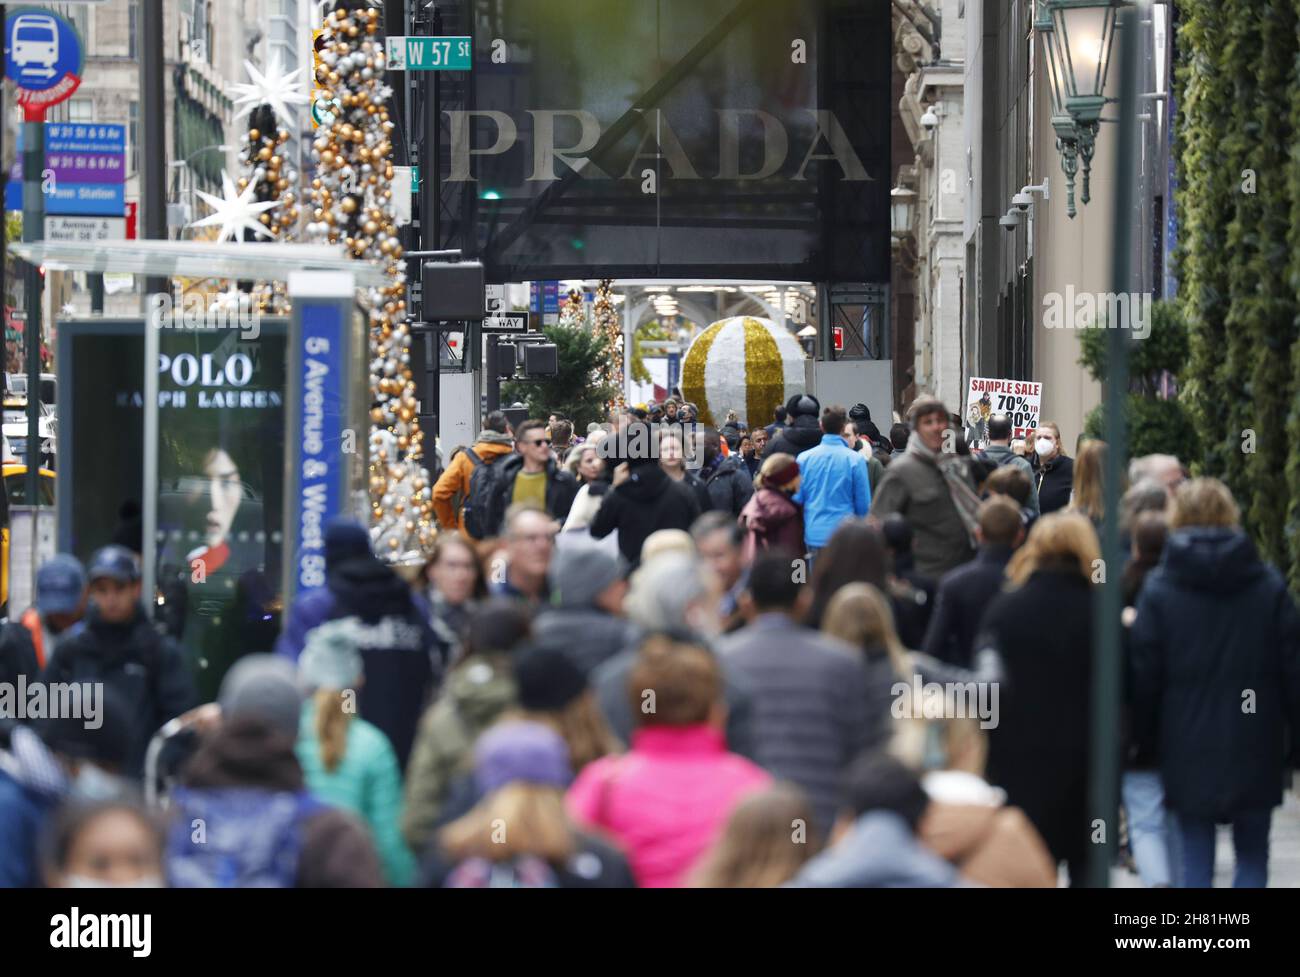 New York, USA. 26th Nov, 2021. Shoppers and pedestrians walk on Fifth Avenue near a Prada retail store on Black Friday in New York City on Friday, November 26, 2021. For over a decade, Black Friday has traditionally been the official start to the busy buying binge sandwiched between Thanksgiving and Christmas. Photo by John Angelillo/UPI Credit: UPI/Alamy Live News Stock Photo